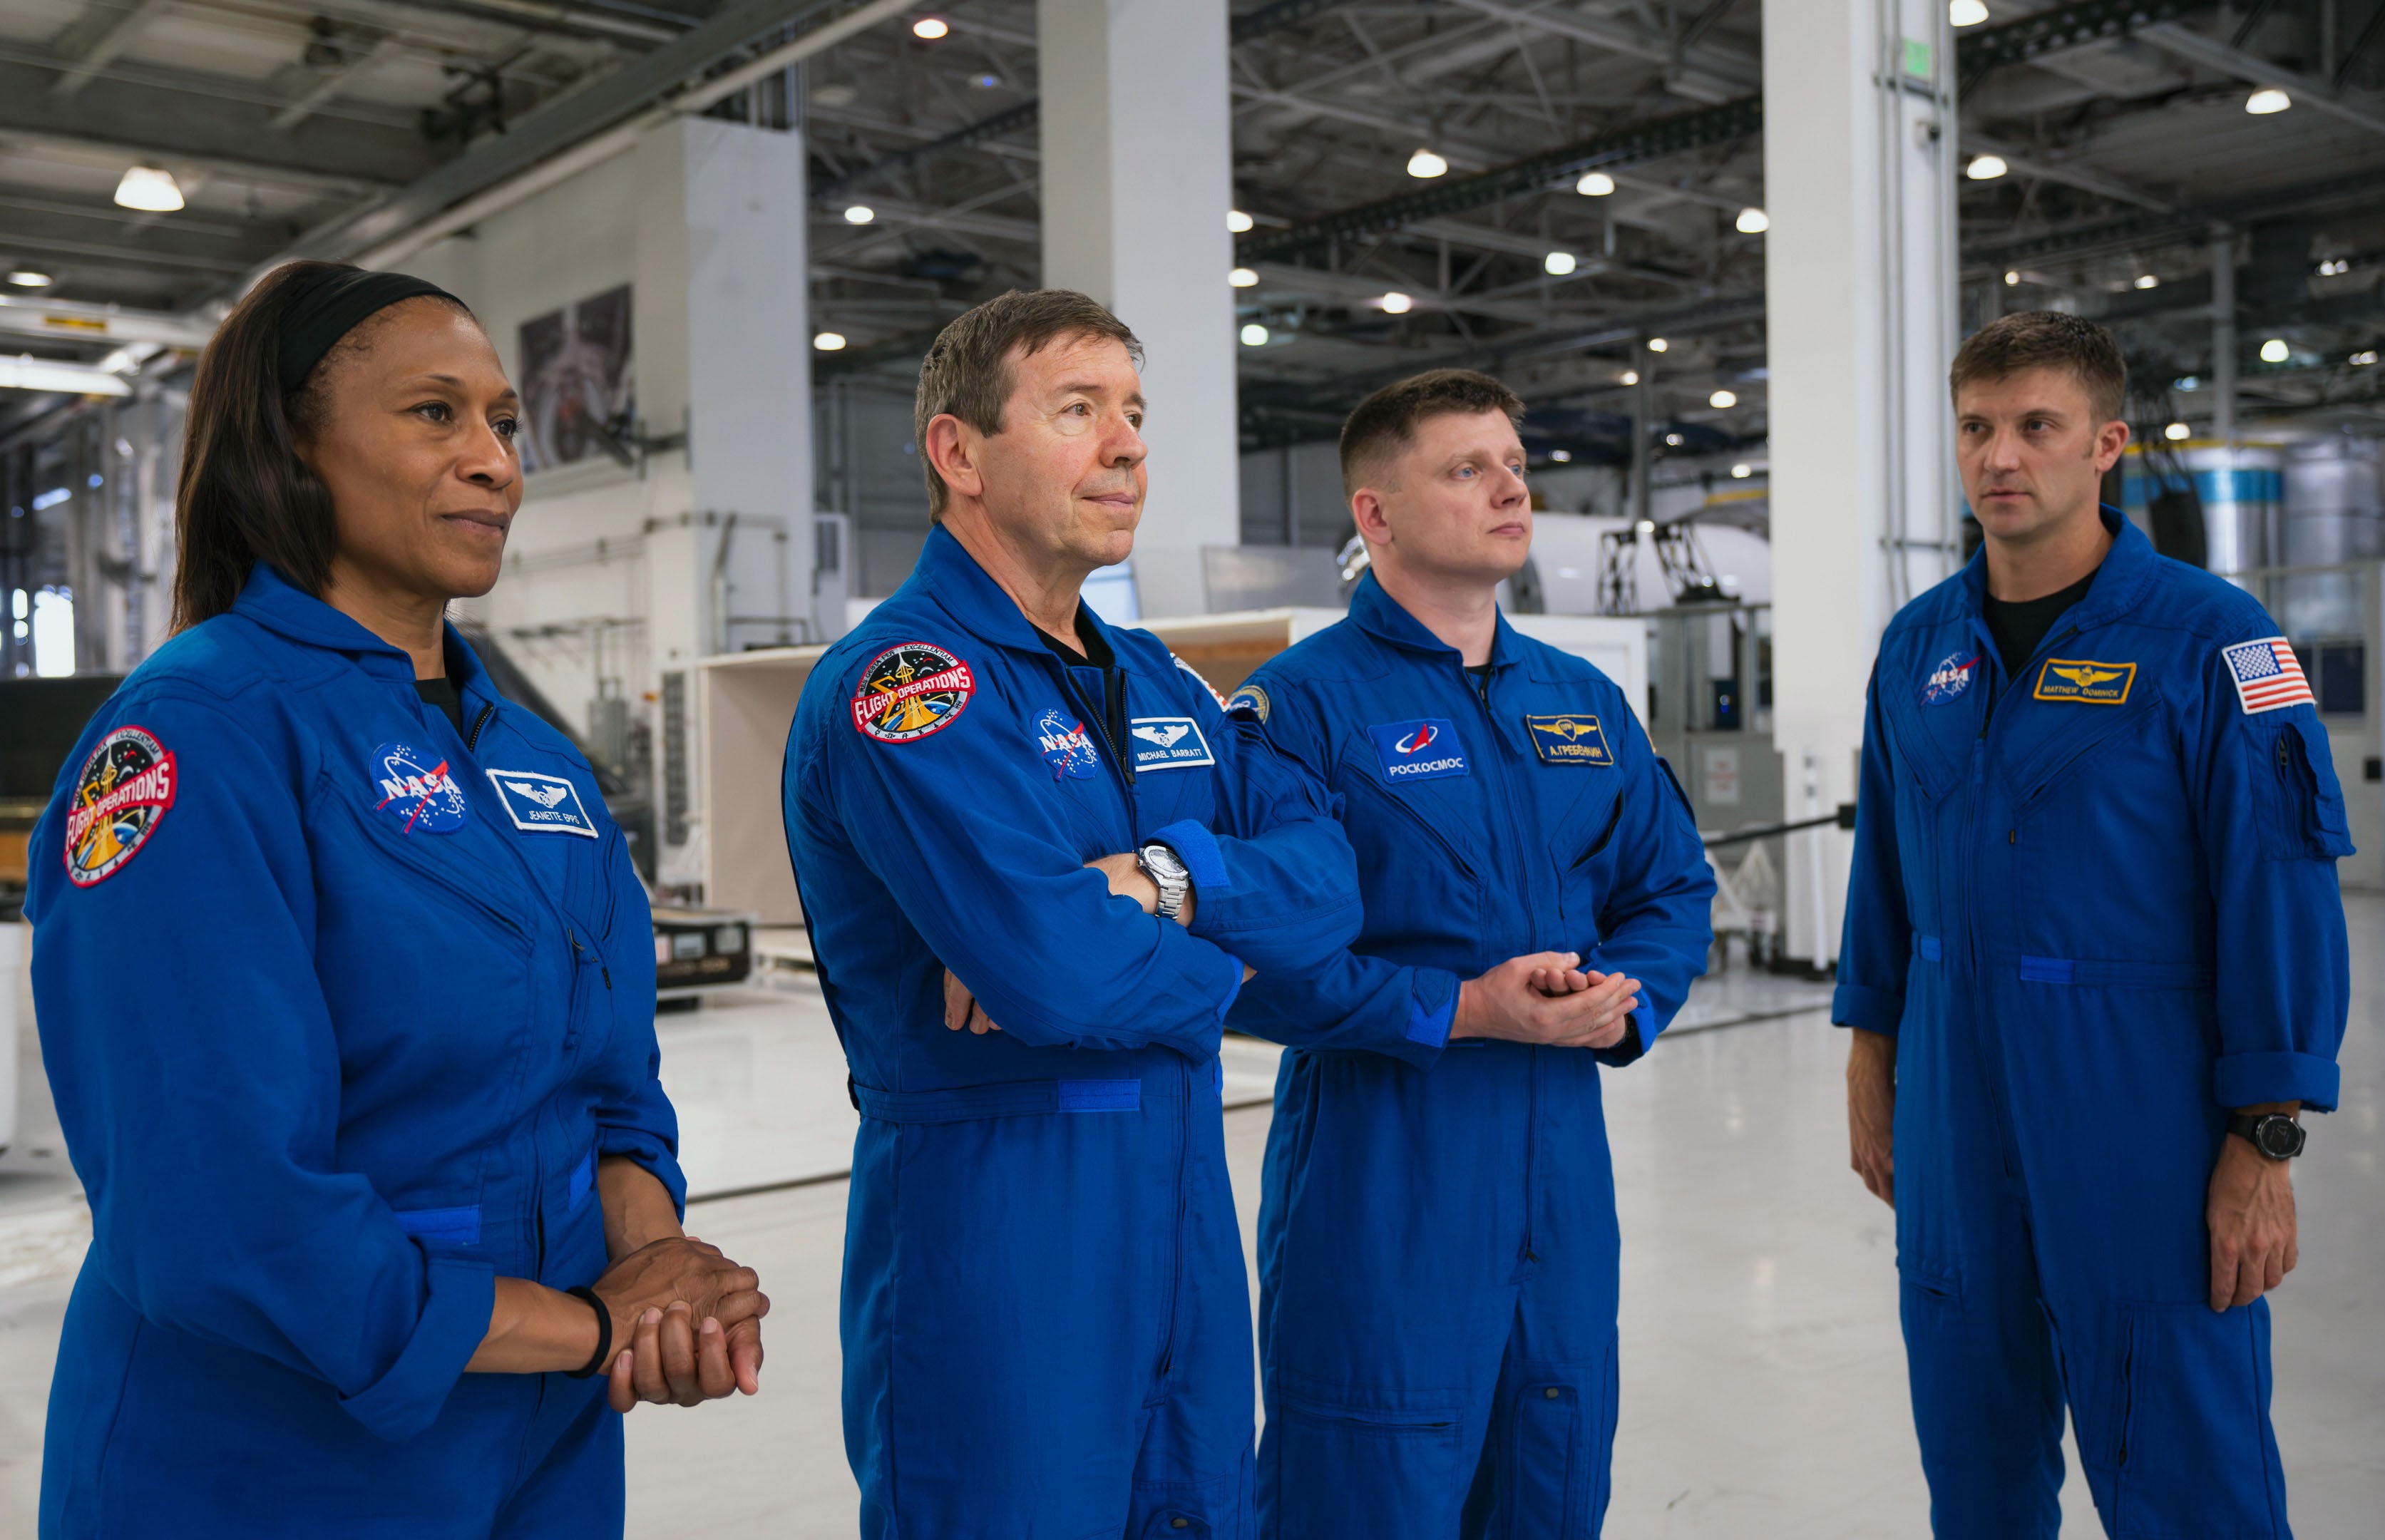 NASA astronaut Jeanette J. Epps, left, and her Crew 7 crew mates during training